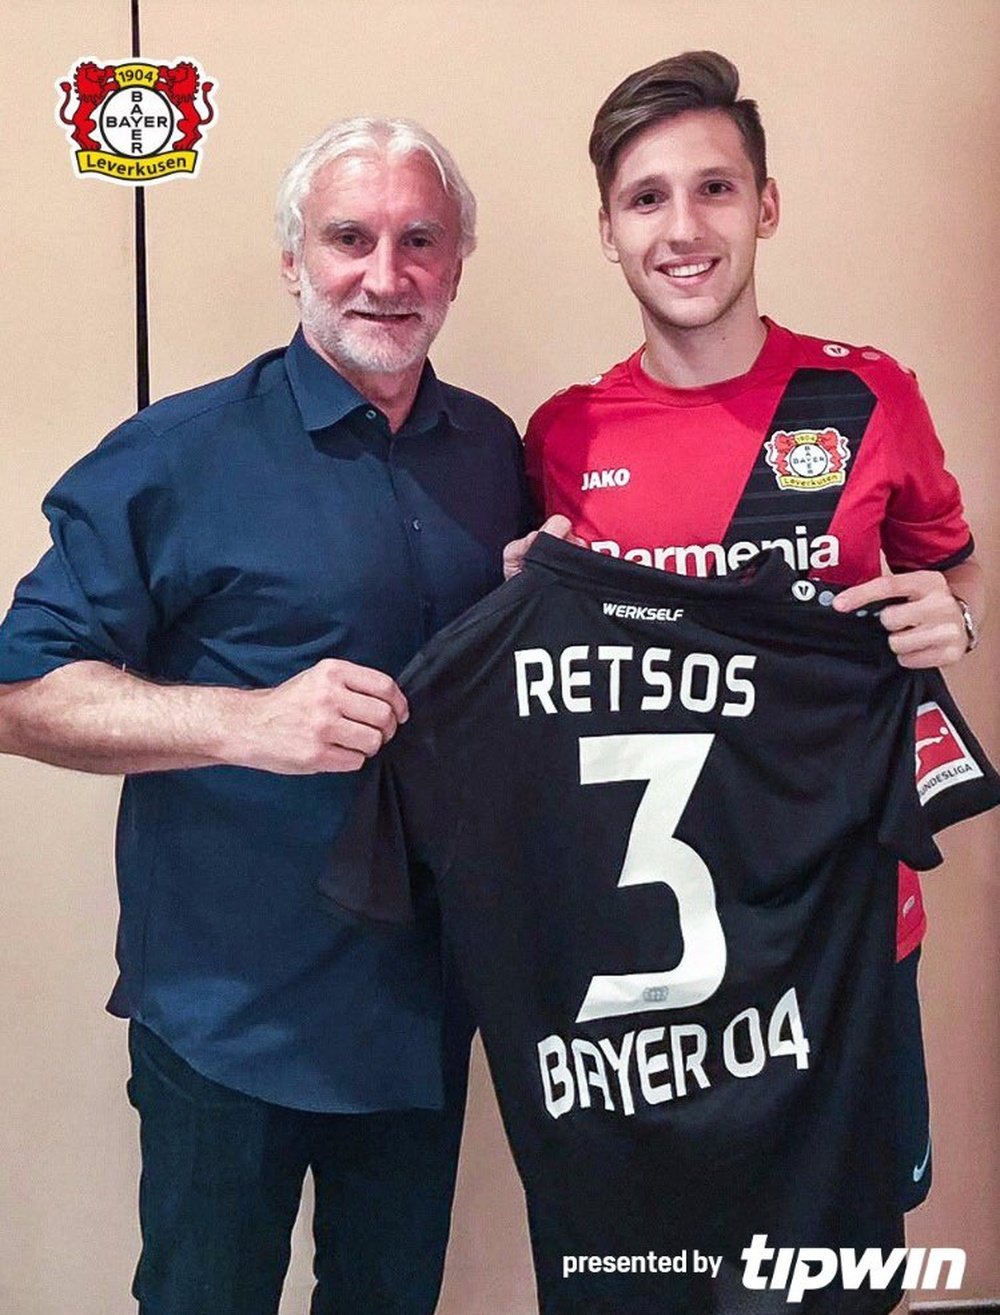 Retsos has signed for Bayer Leverkusen from Olympiacos. Bayer04